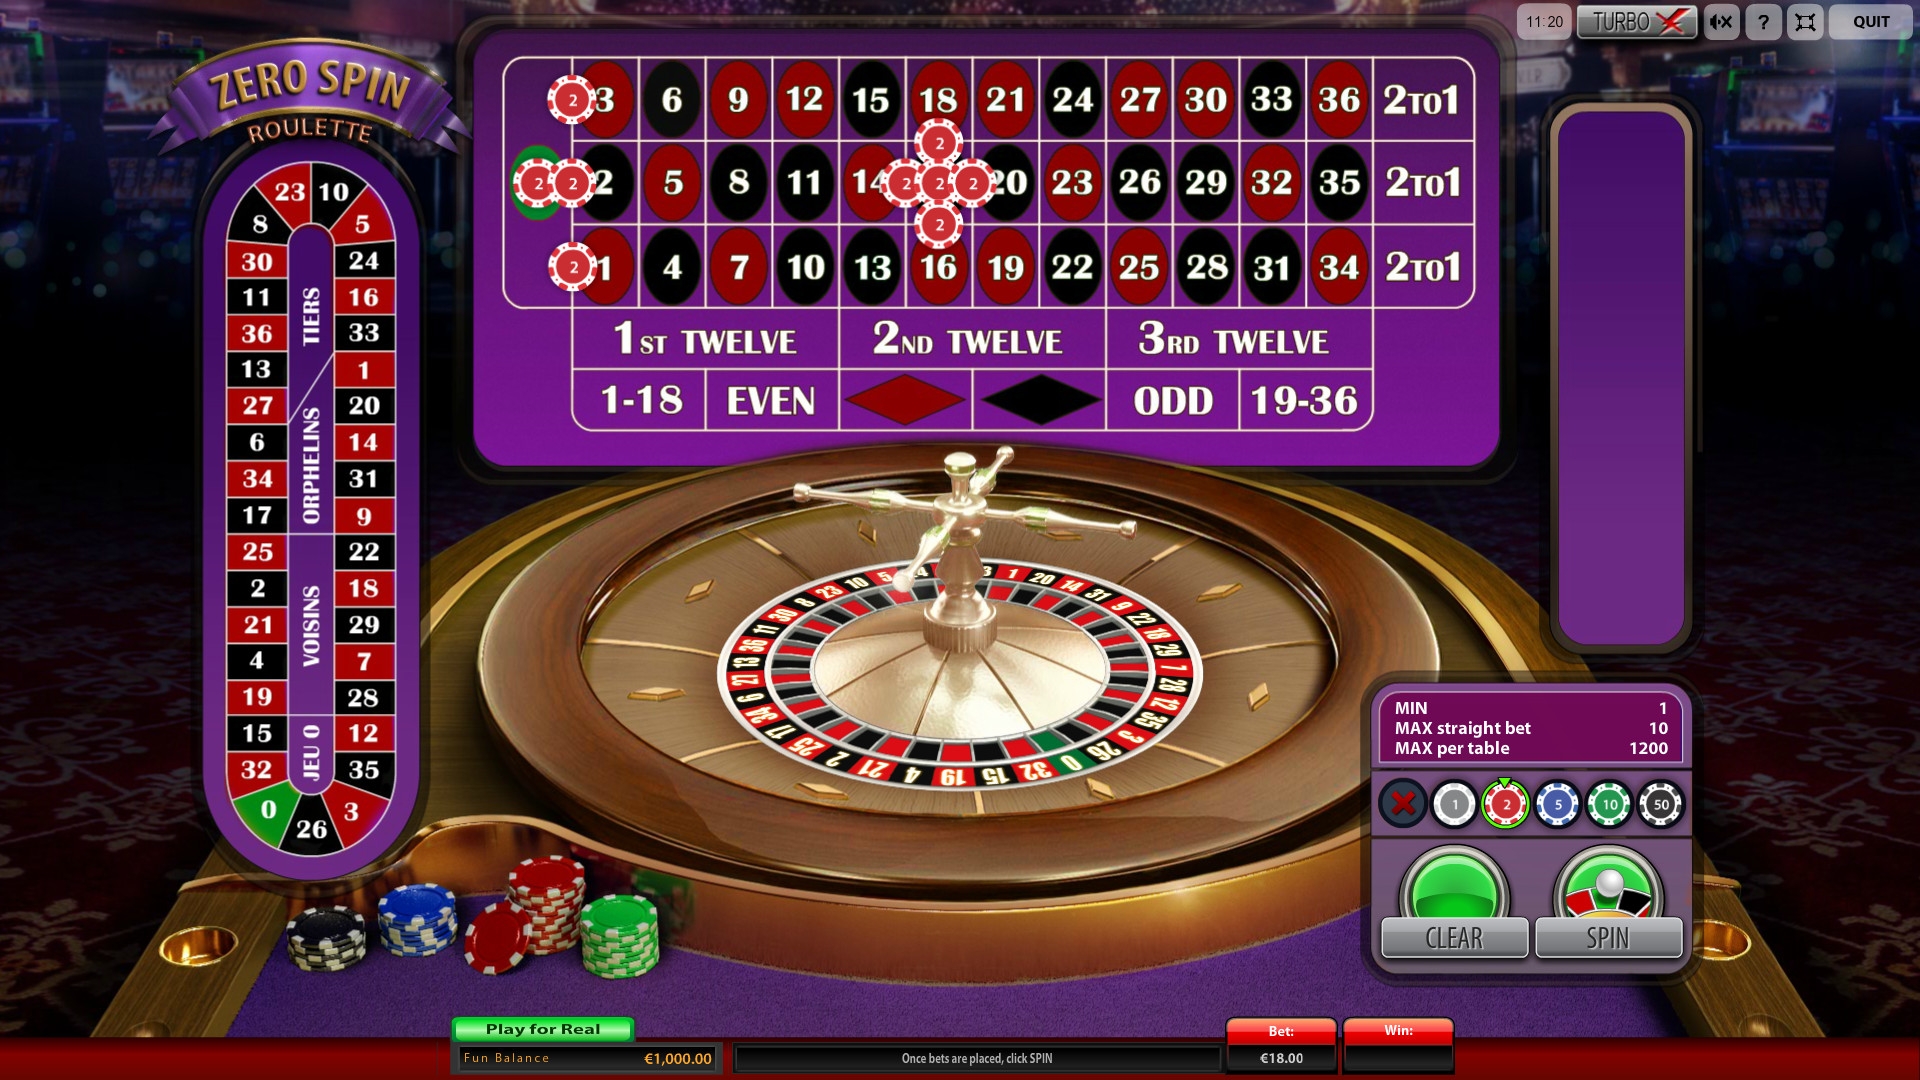 Zero Spin Roulette (Zero Spin Roulette) from category Roulette